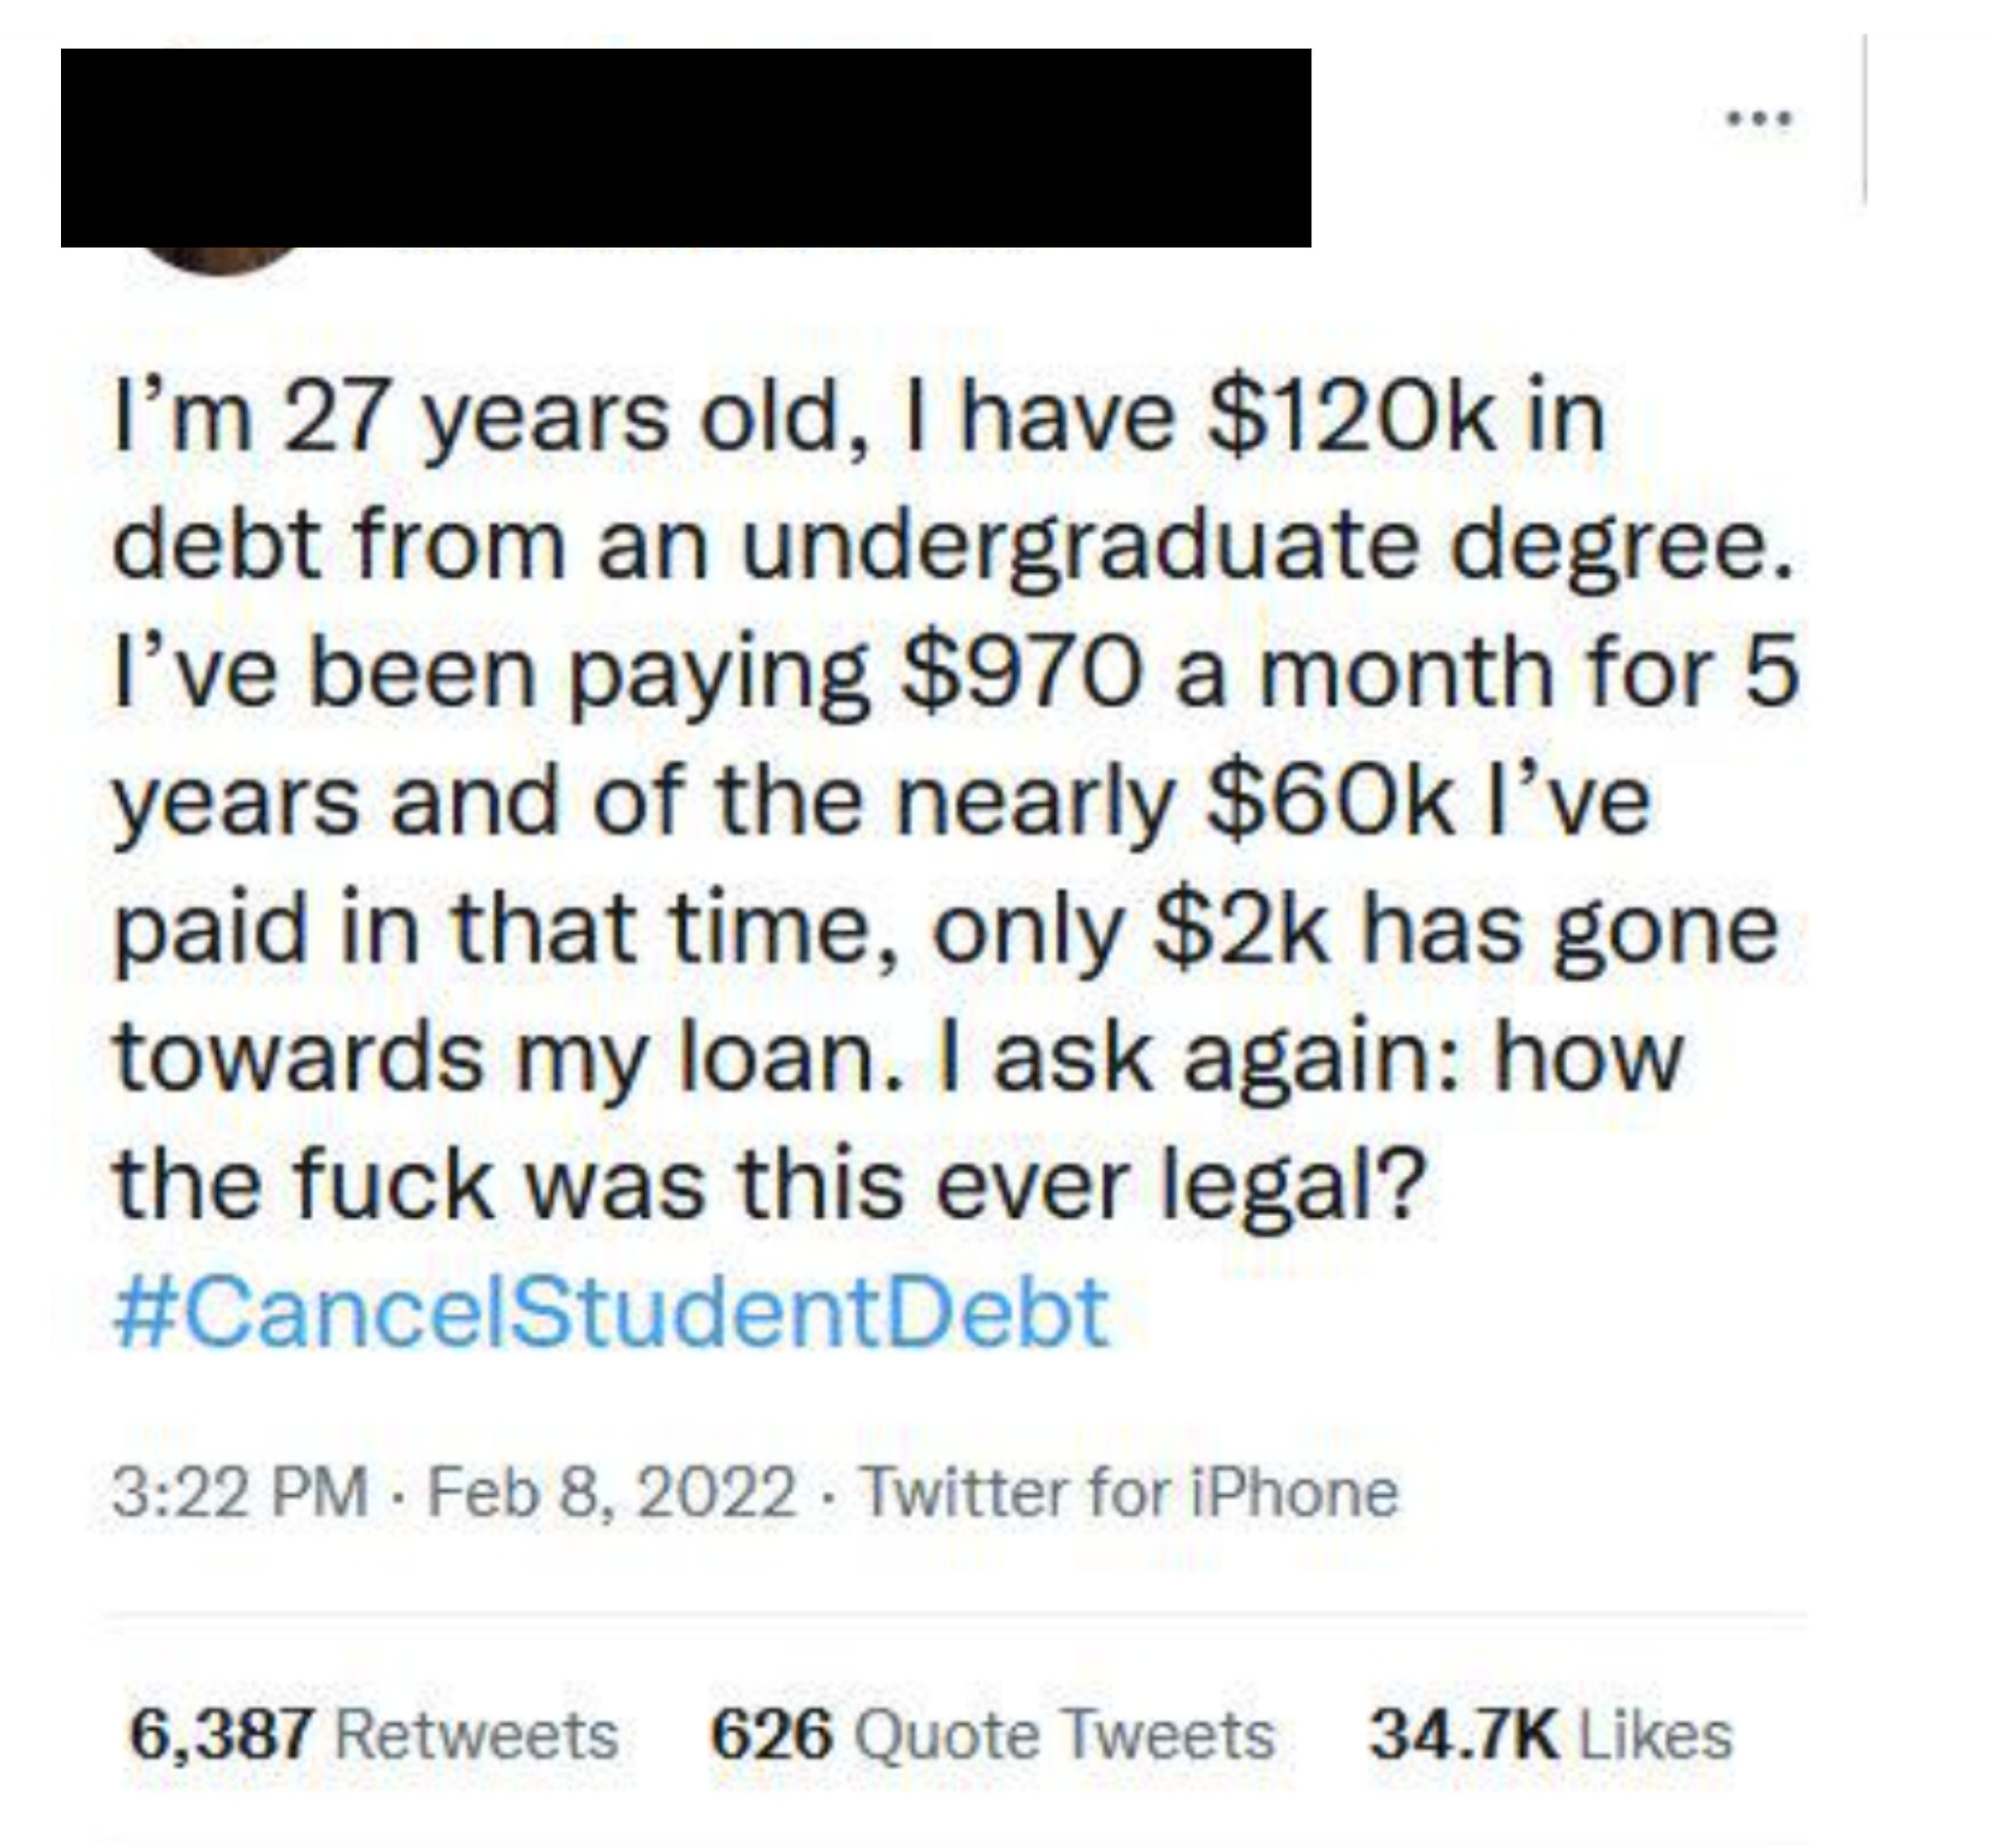 Text stating, &quot;I&#x27;m 27 years old, I have $120k i debt from an undergraduate degree. I&#x27;ve been paying $970 a month for 5 years and of the nearly $60k I&#x27;ve paid in that time, only $2k has gone towards my loan.&quot;